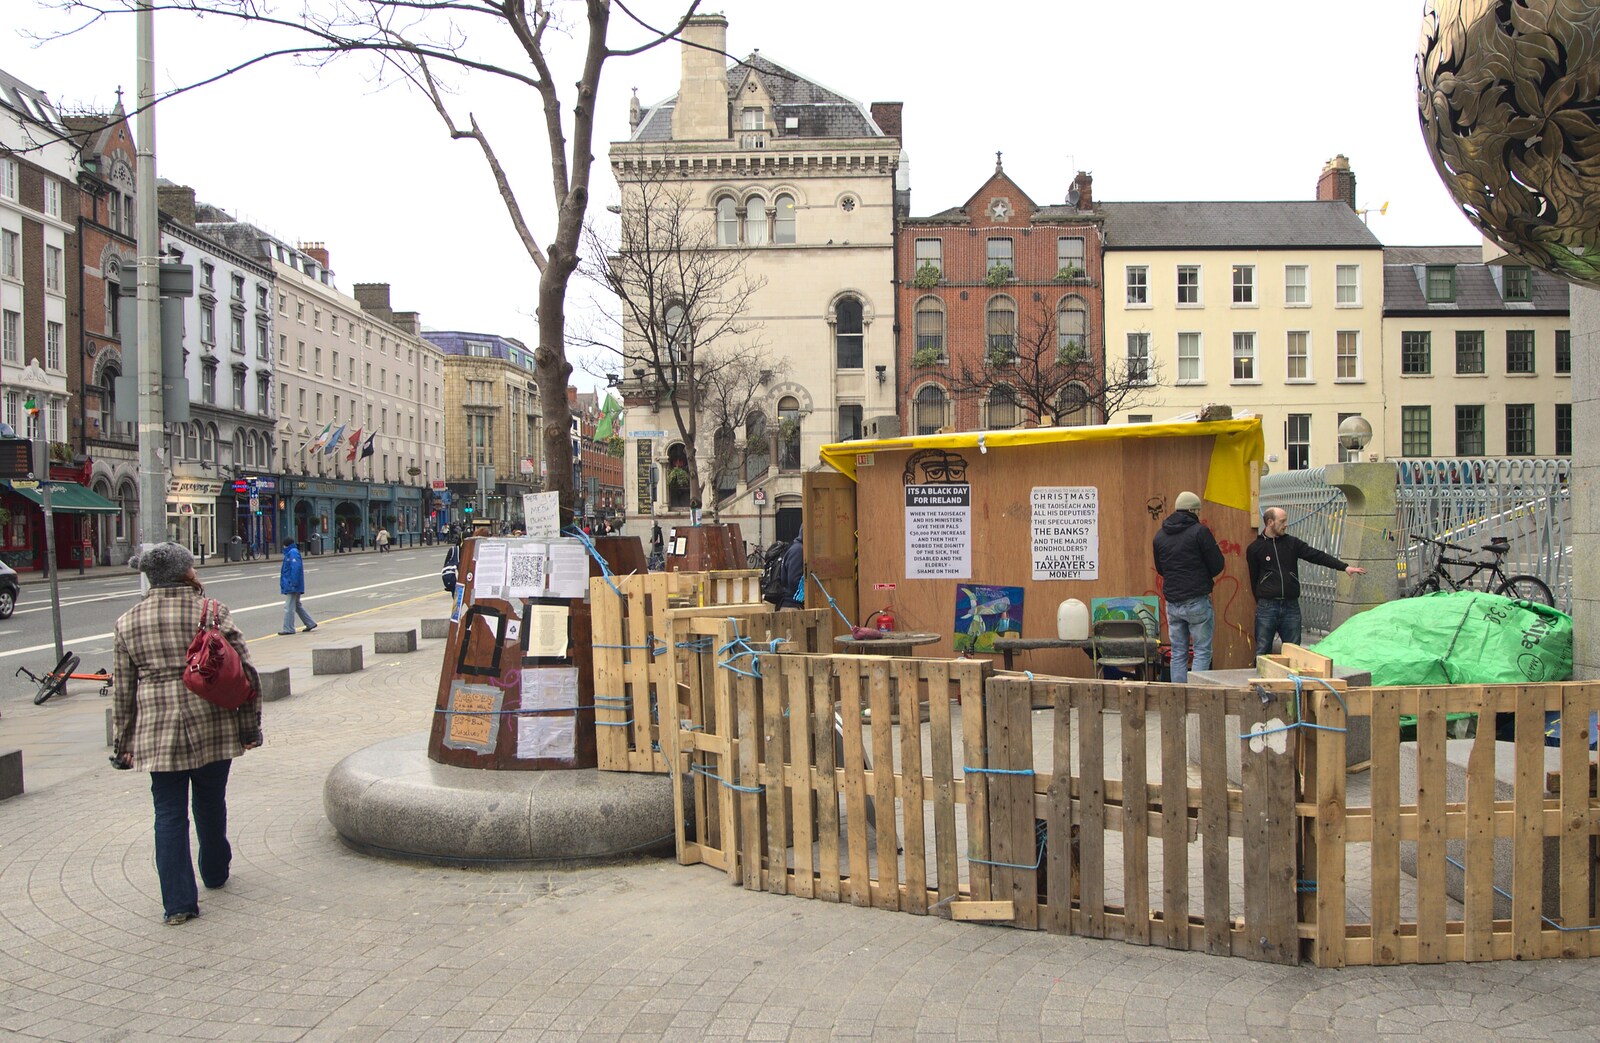 A Day in Dublin, Ireland - 7th January 2012: Isobel roams around by the 'Occupy' camp